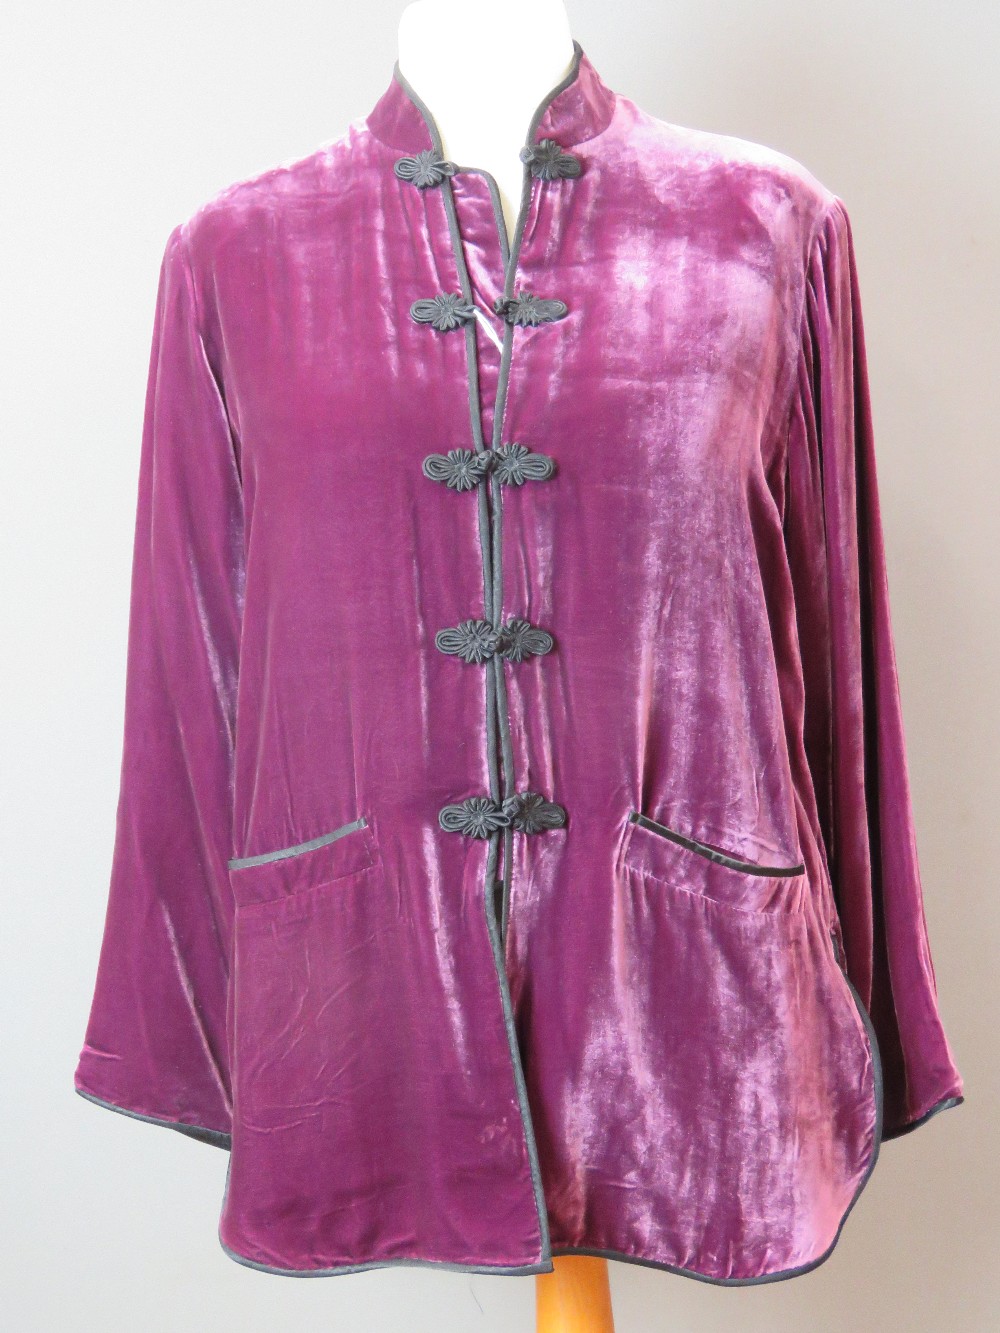 Ladies purple velvet jacket size L having mandarin collar with tie fastenings and two pockets.